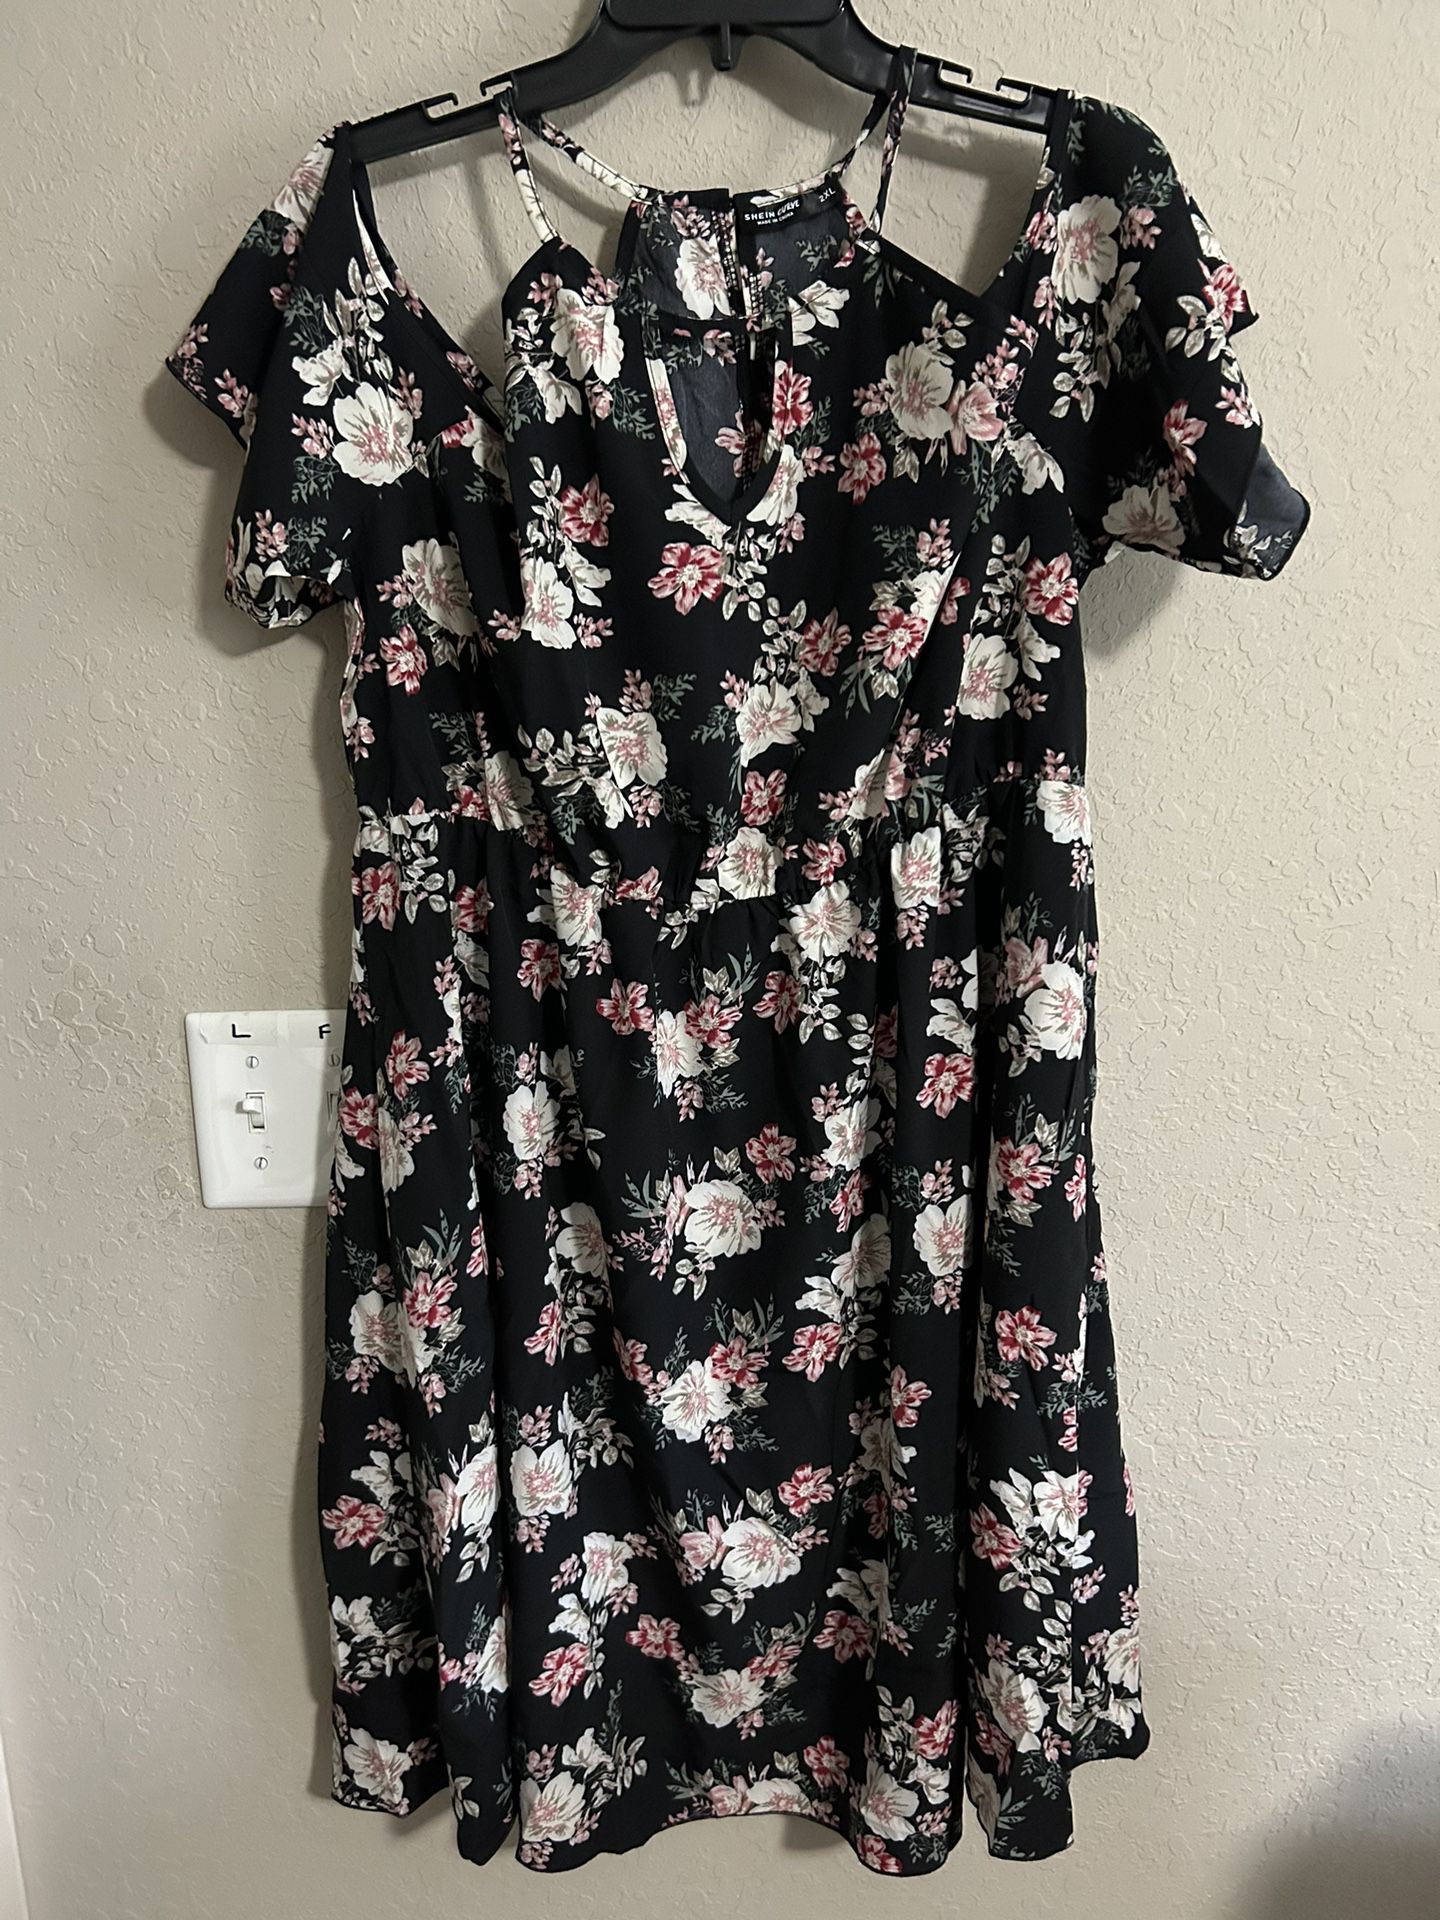 New Shein Curve Floral Dress for Sale in Troutman, NC - OfferUp